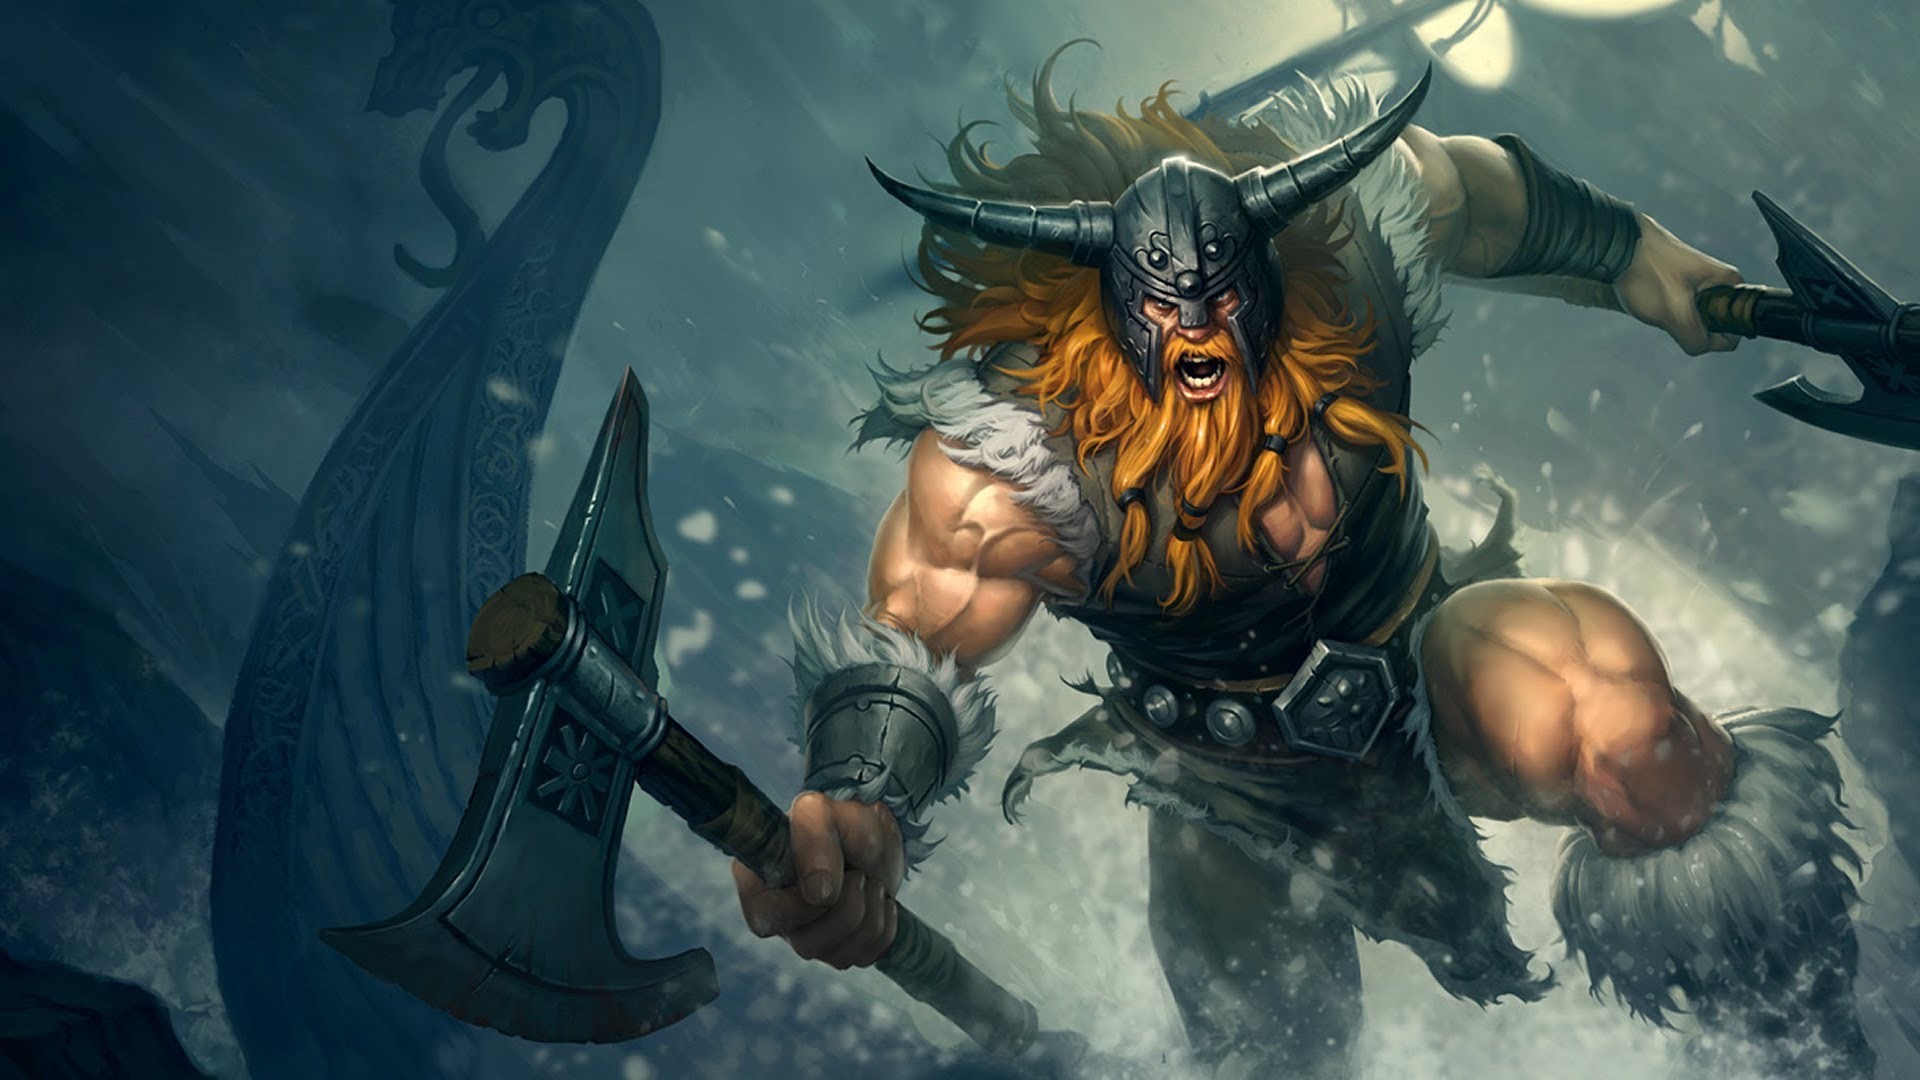 Wallpaper Angry warrior, viking, League of legends video game, gaming